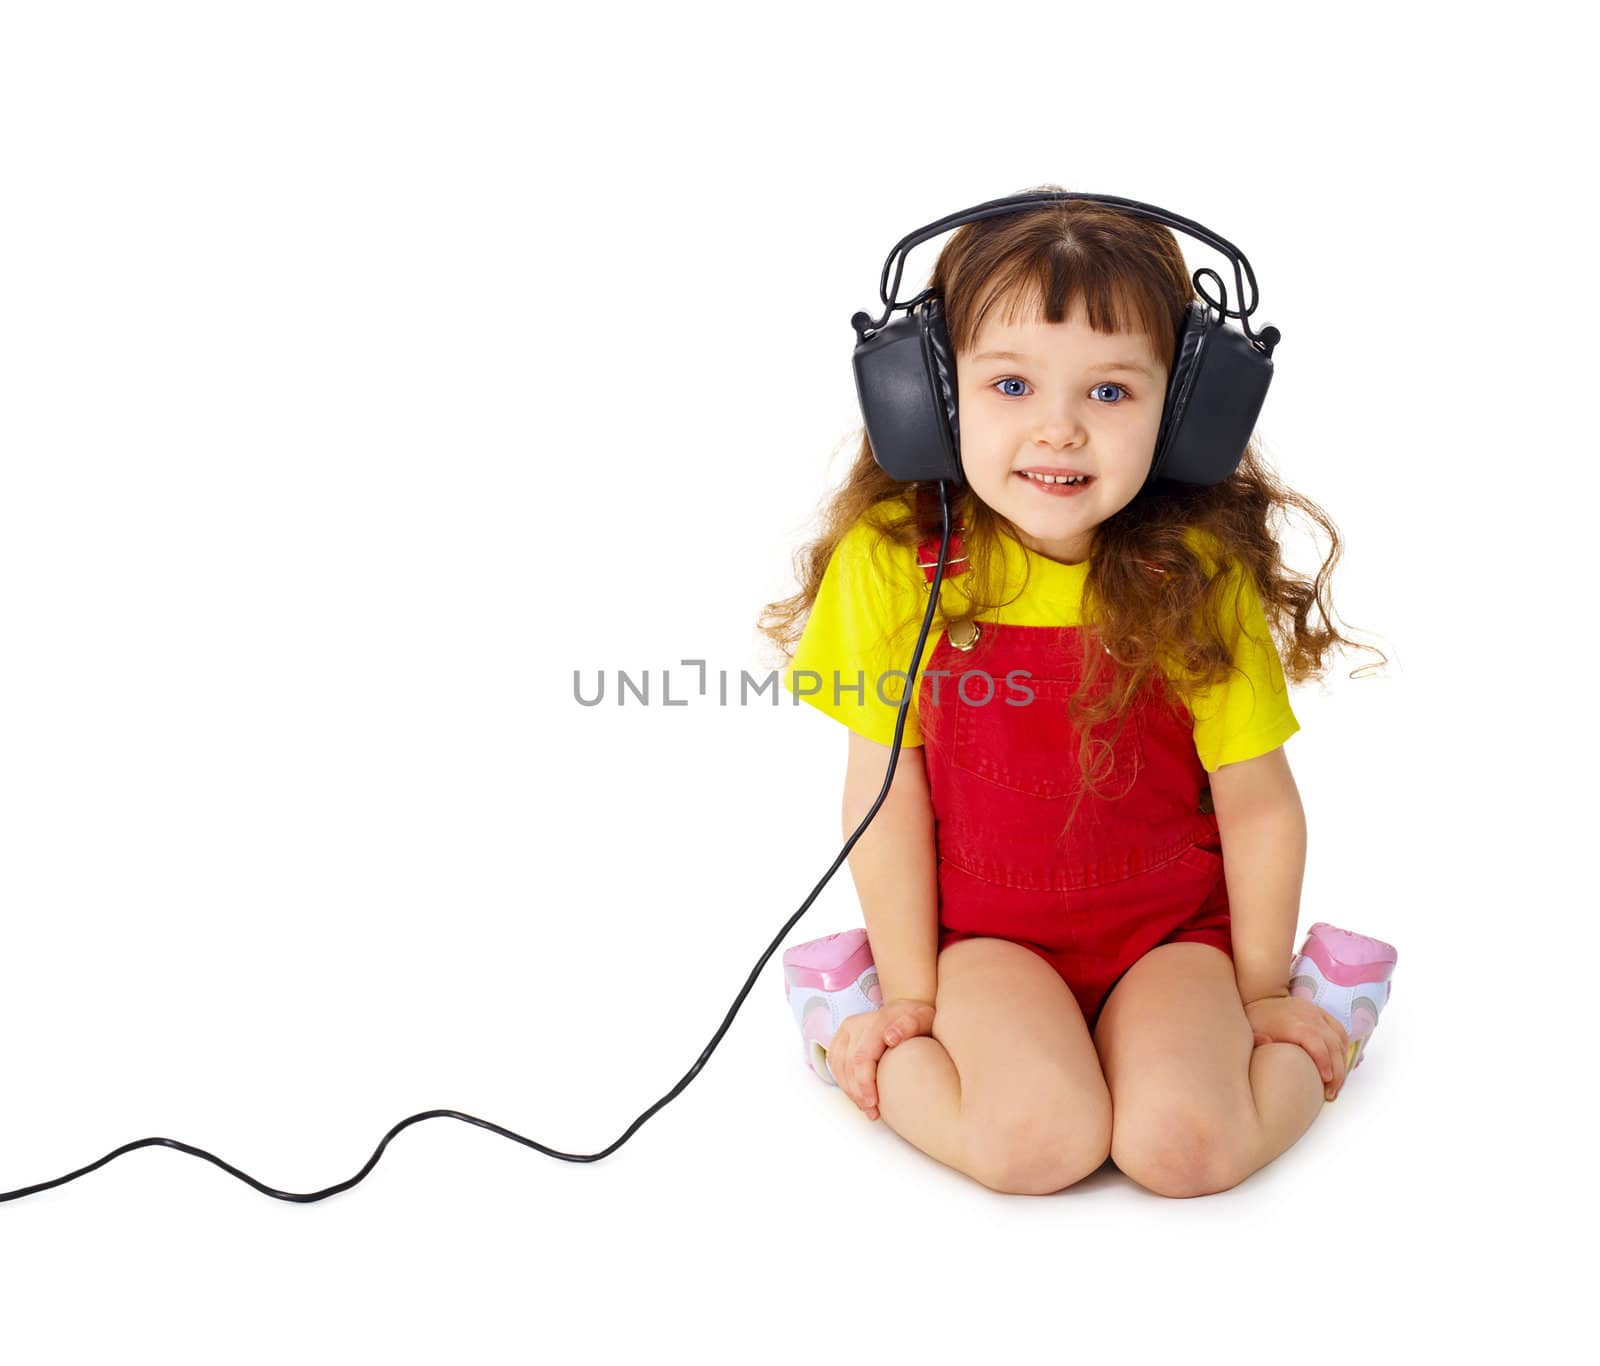 The child sits and listens attentively to the music isolated on white background